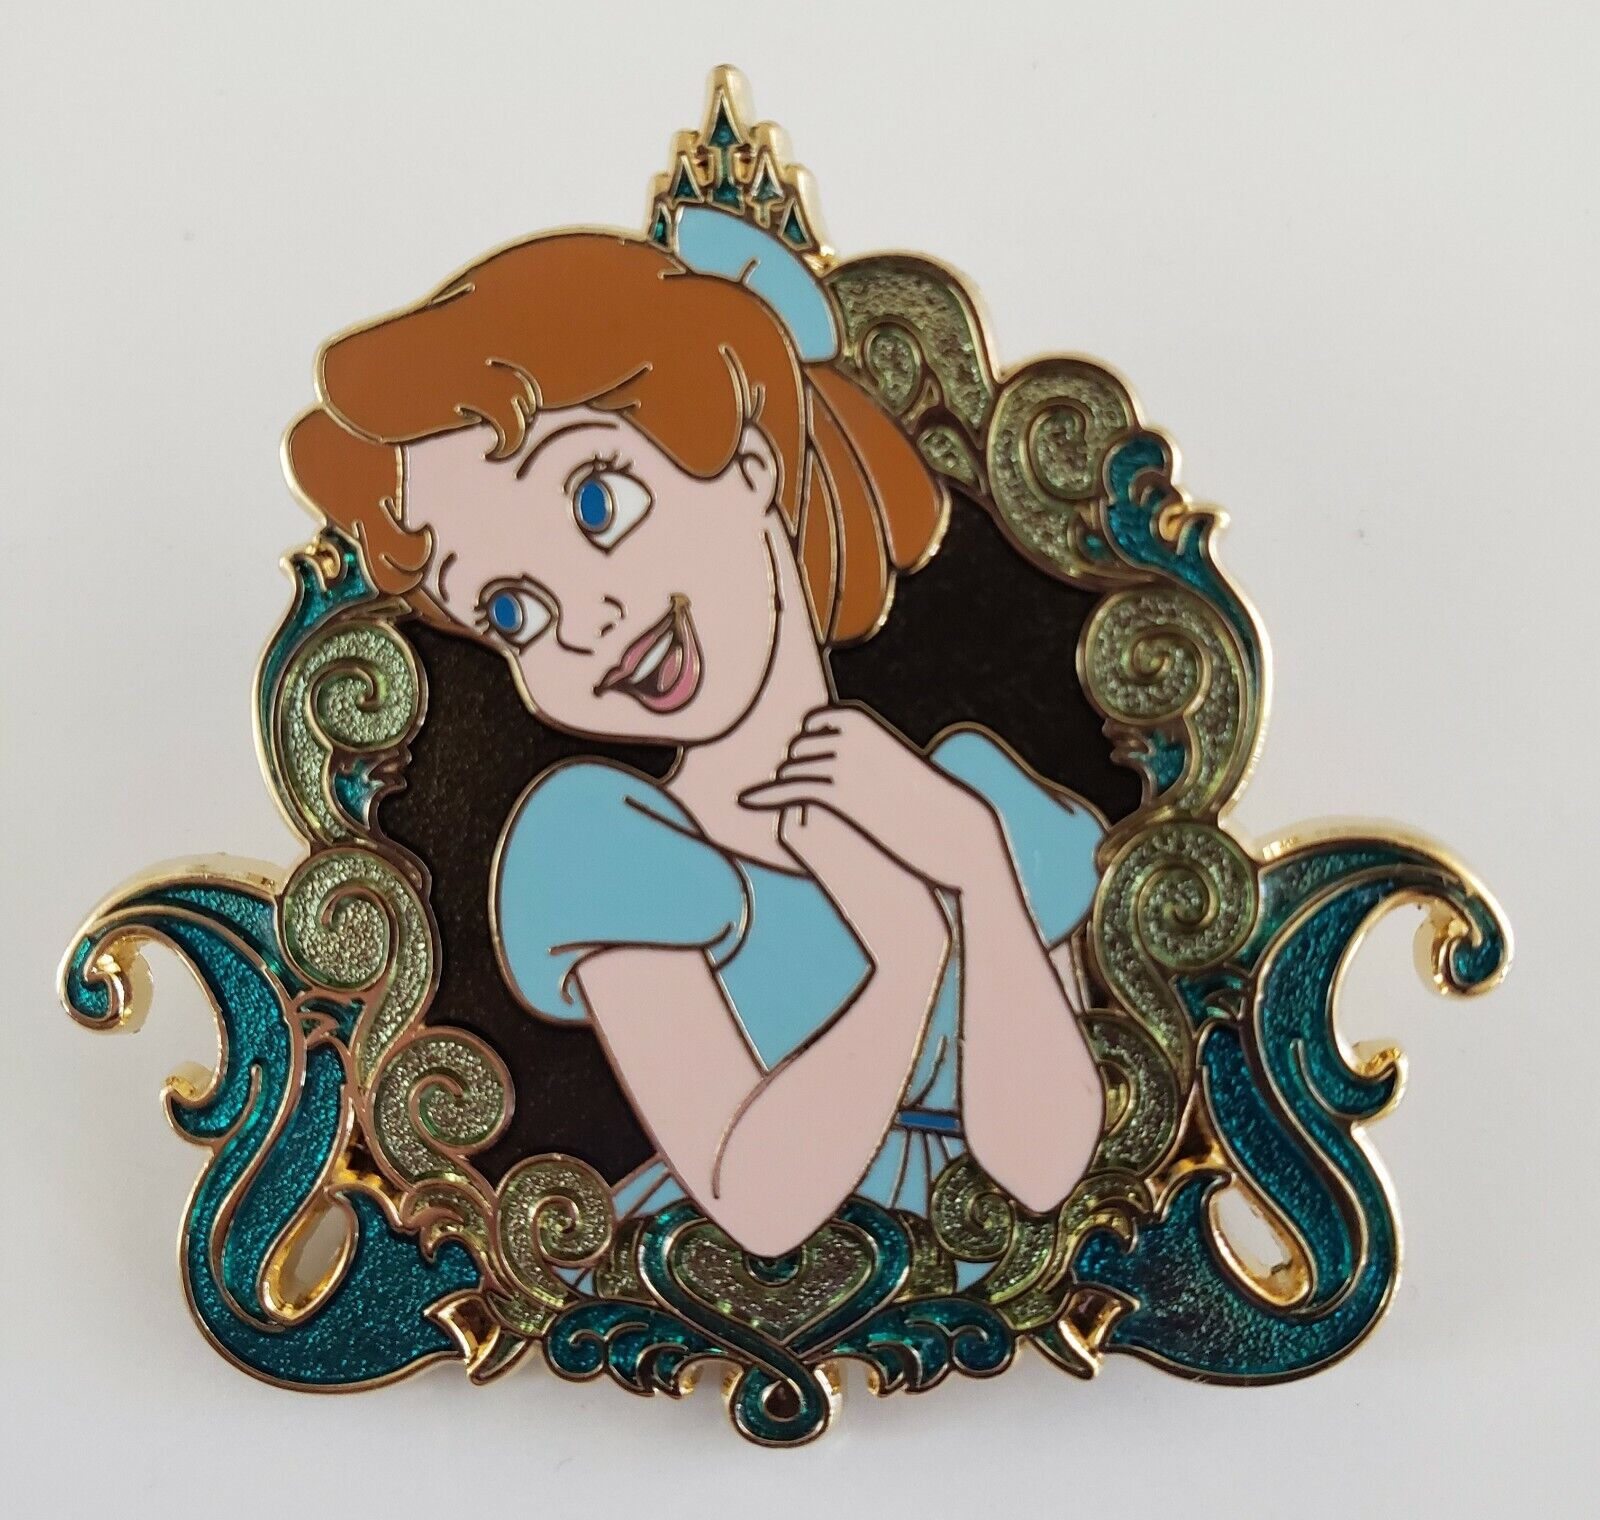 RARE DLR DISNEY GIRLS-WENDY CONCEALED MYSTERY R/C COLLECTION LR PIN-FREE SHPG